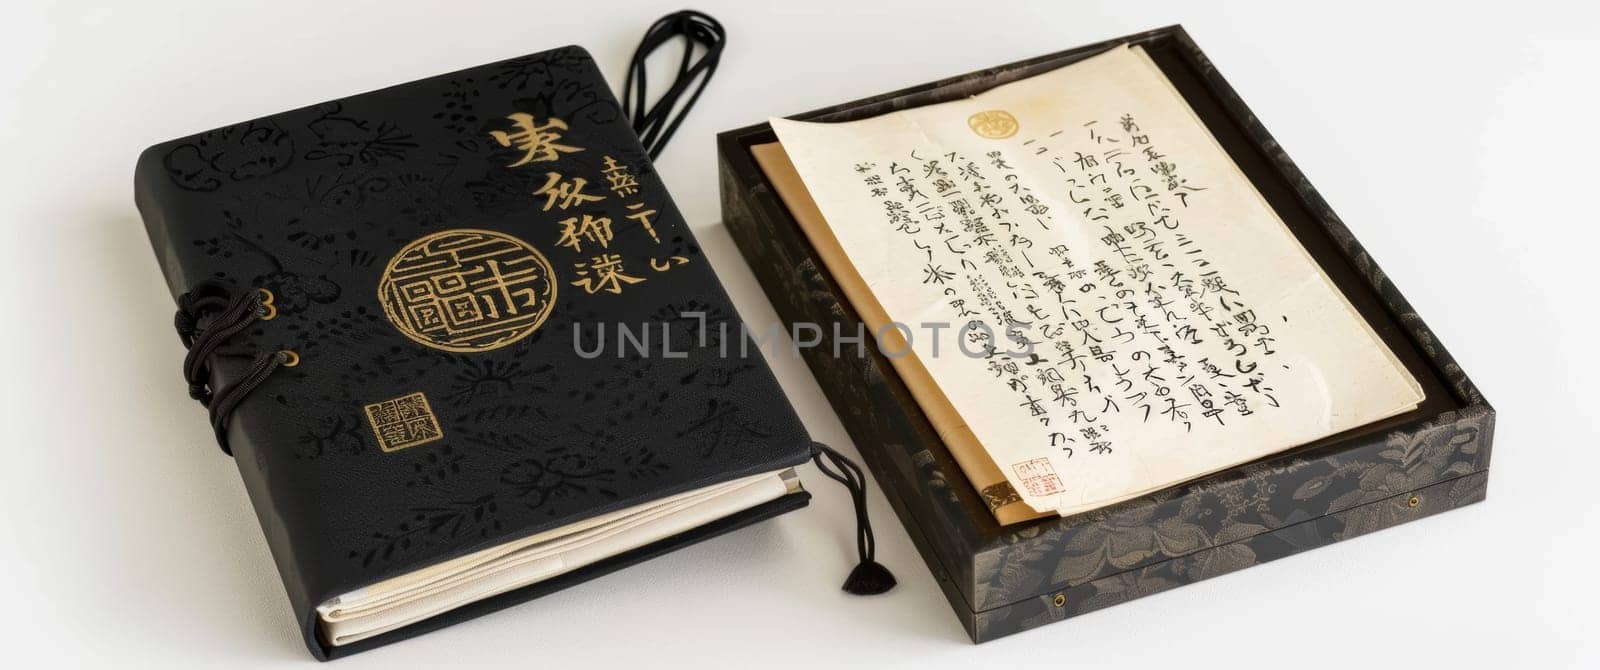 Exquisite Japanese calligraphy artwork presented in a traditional box, reflecting the timeless beauty of the script. by sfinks